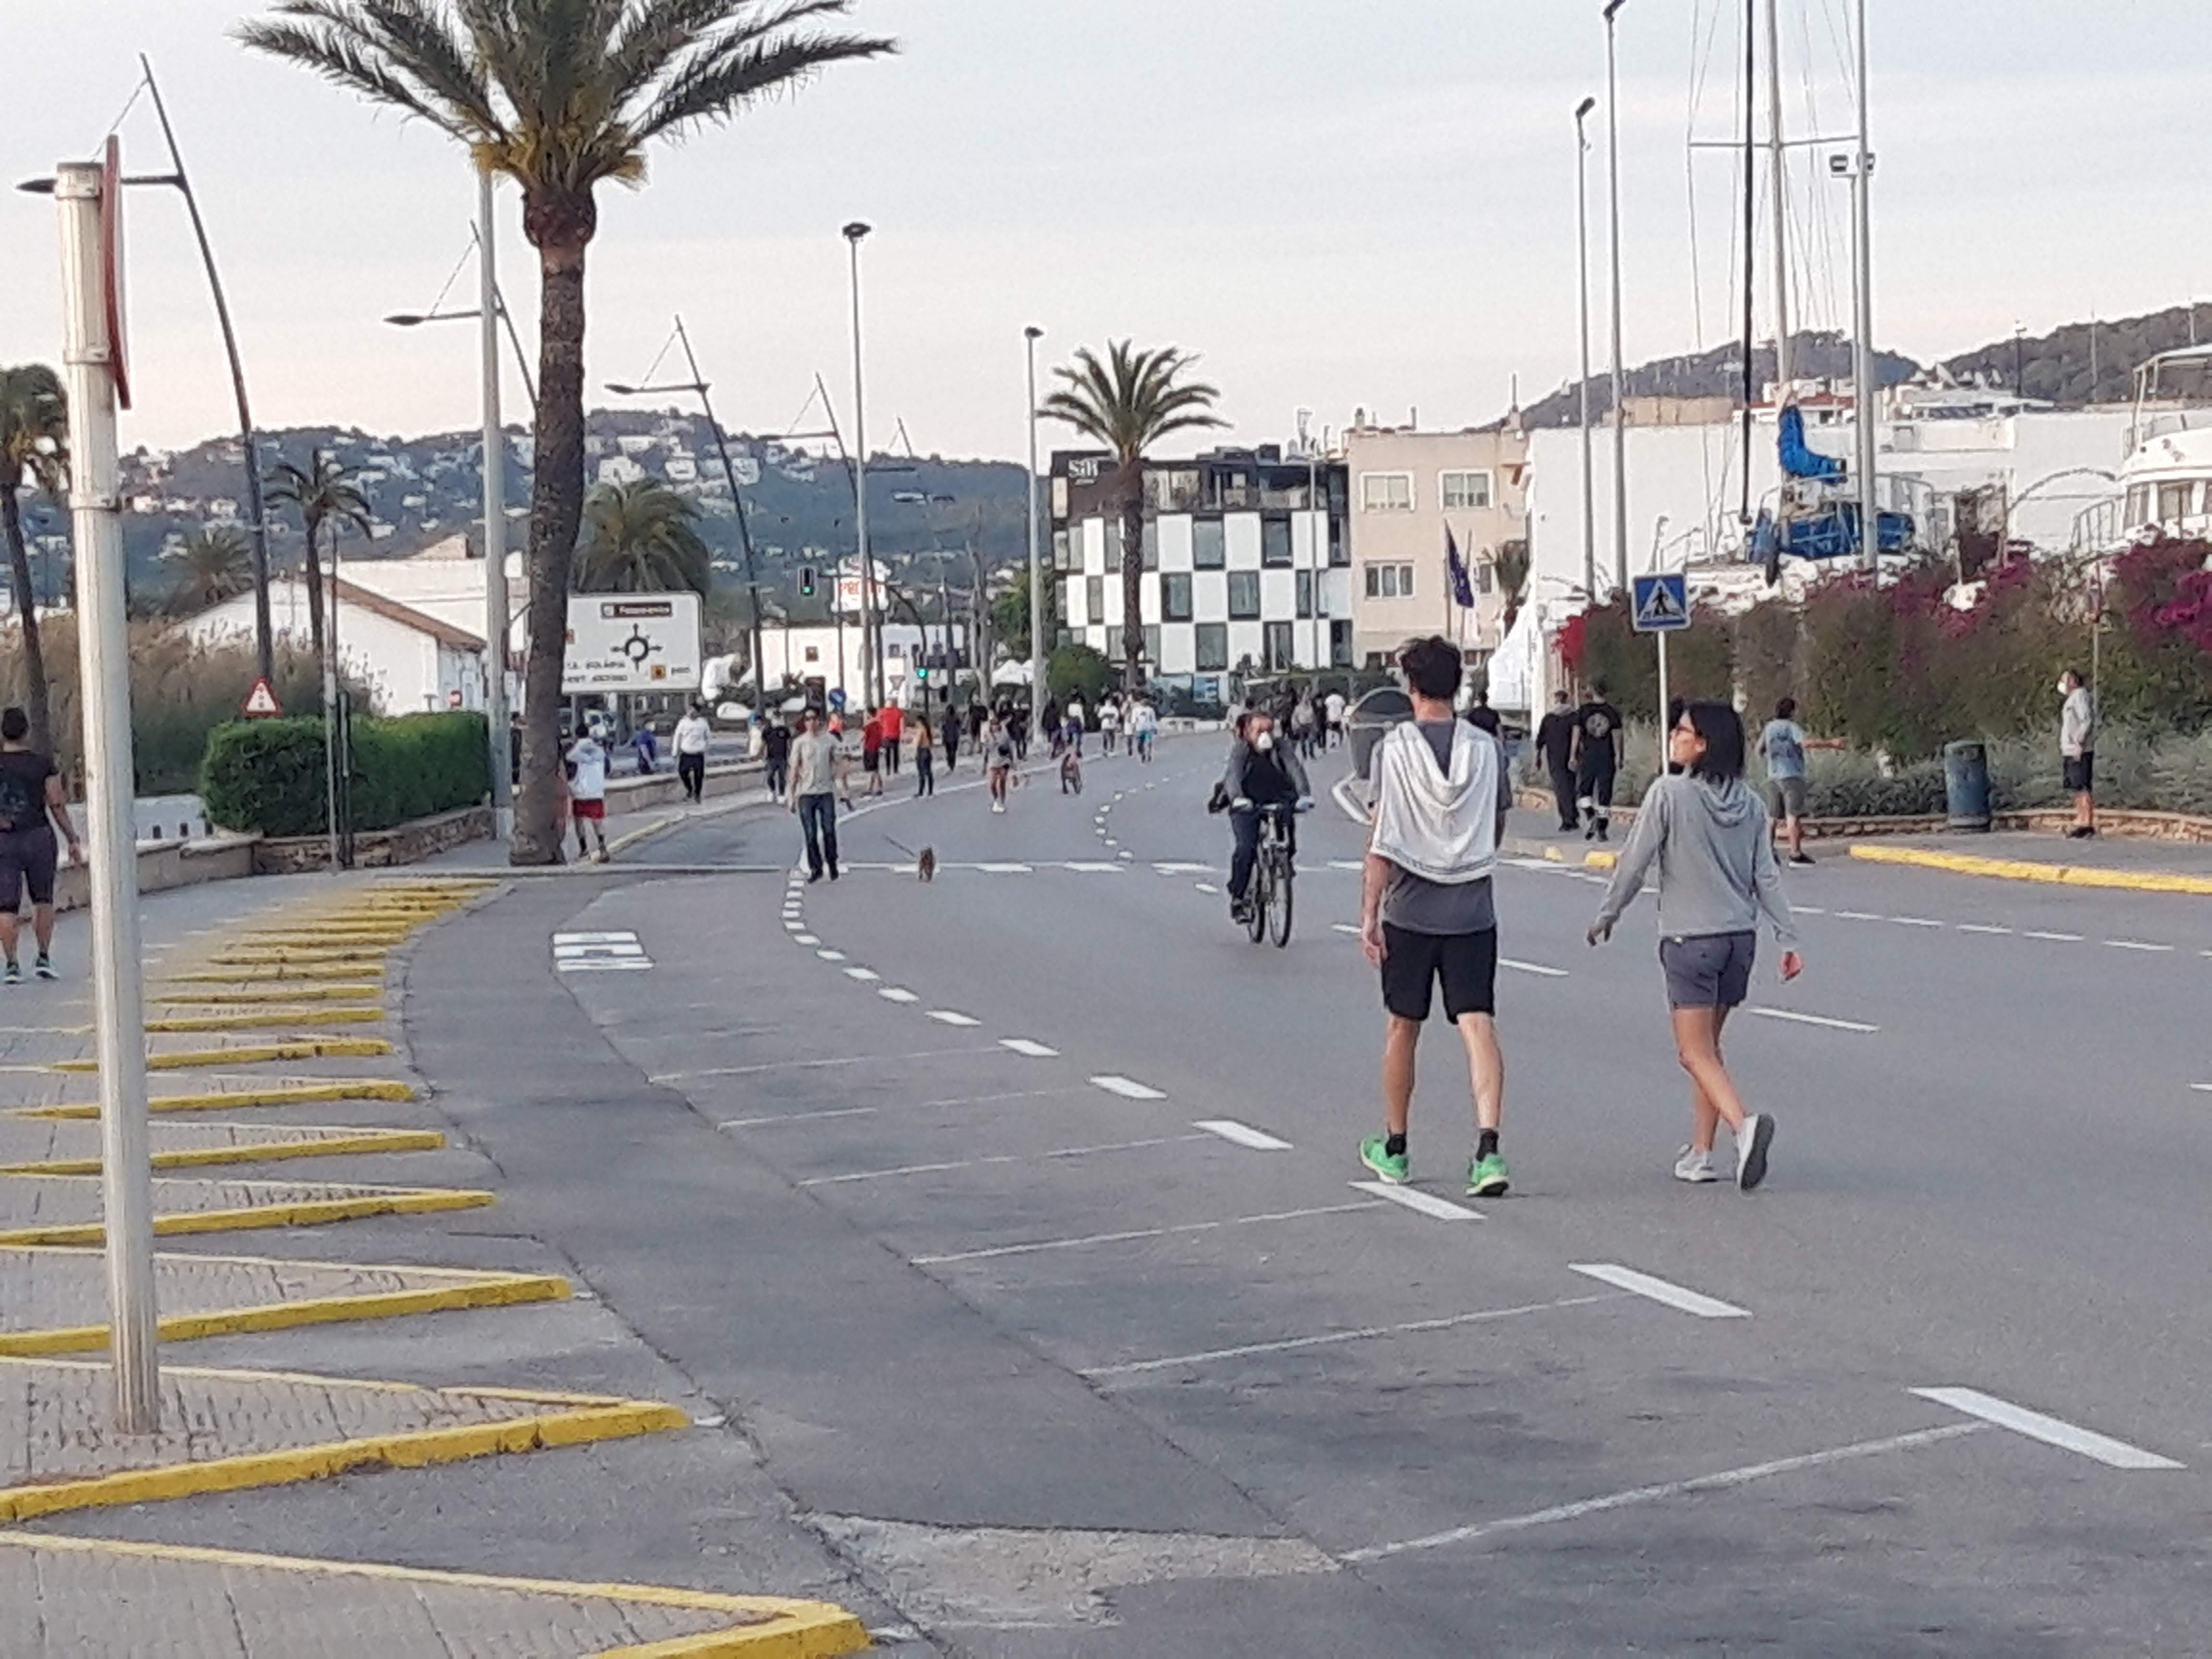 The APB restricts road traffic in the Port of Ibiza in favour of pedestrian use